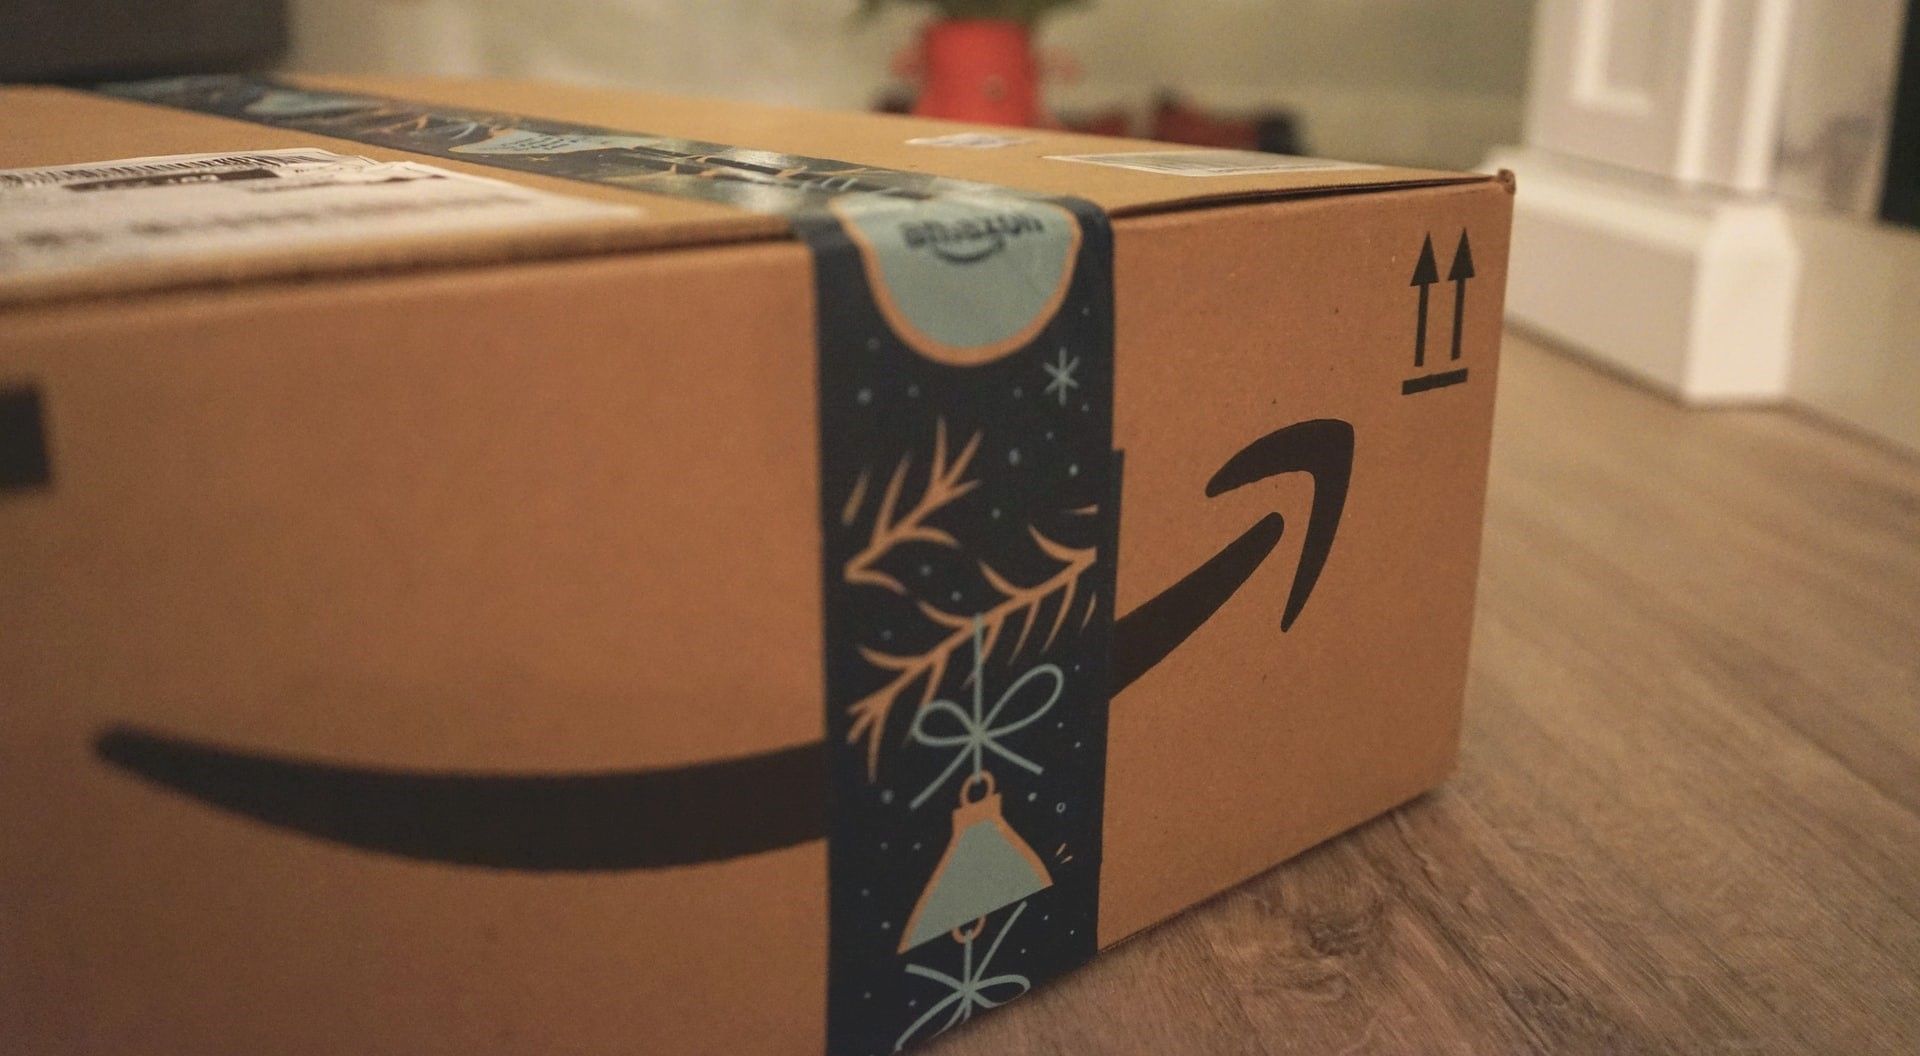 photo of amazon package